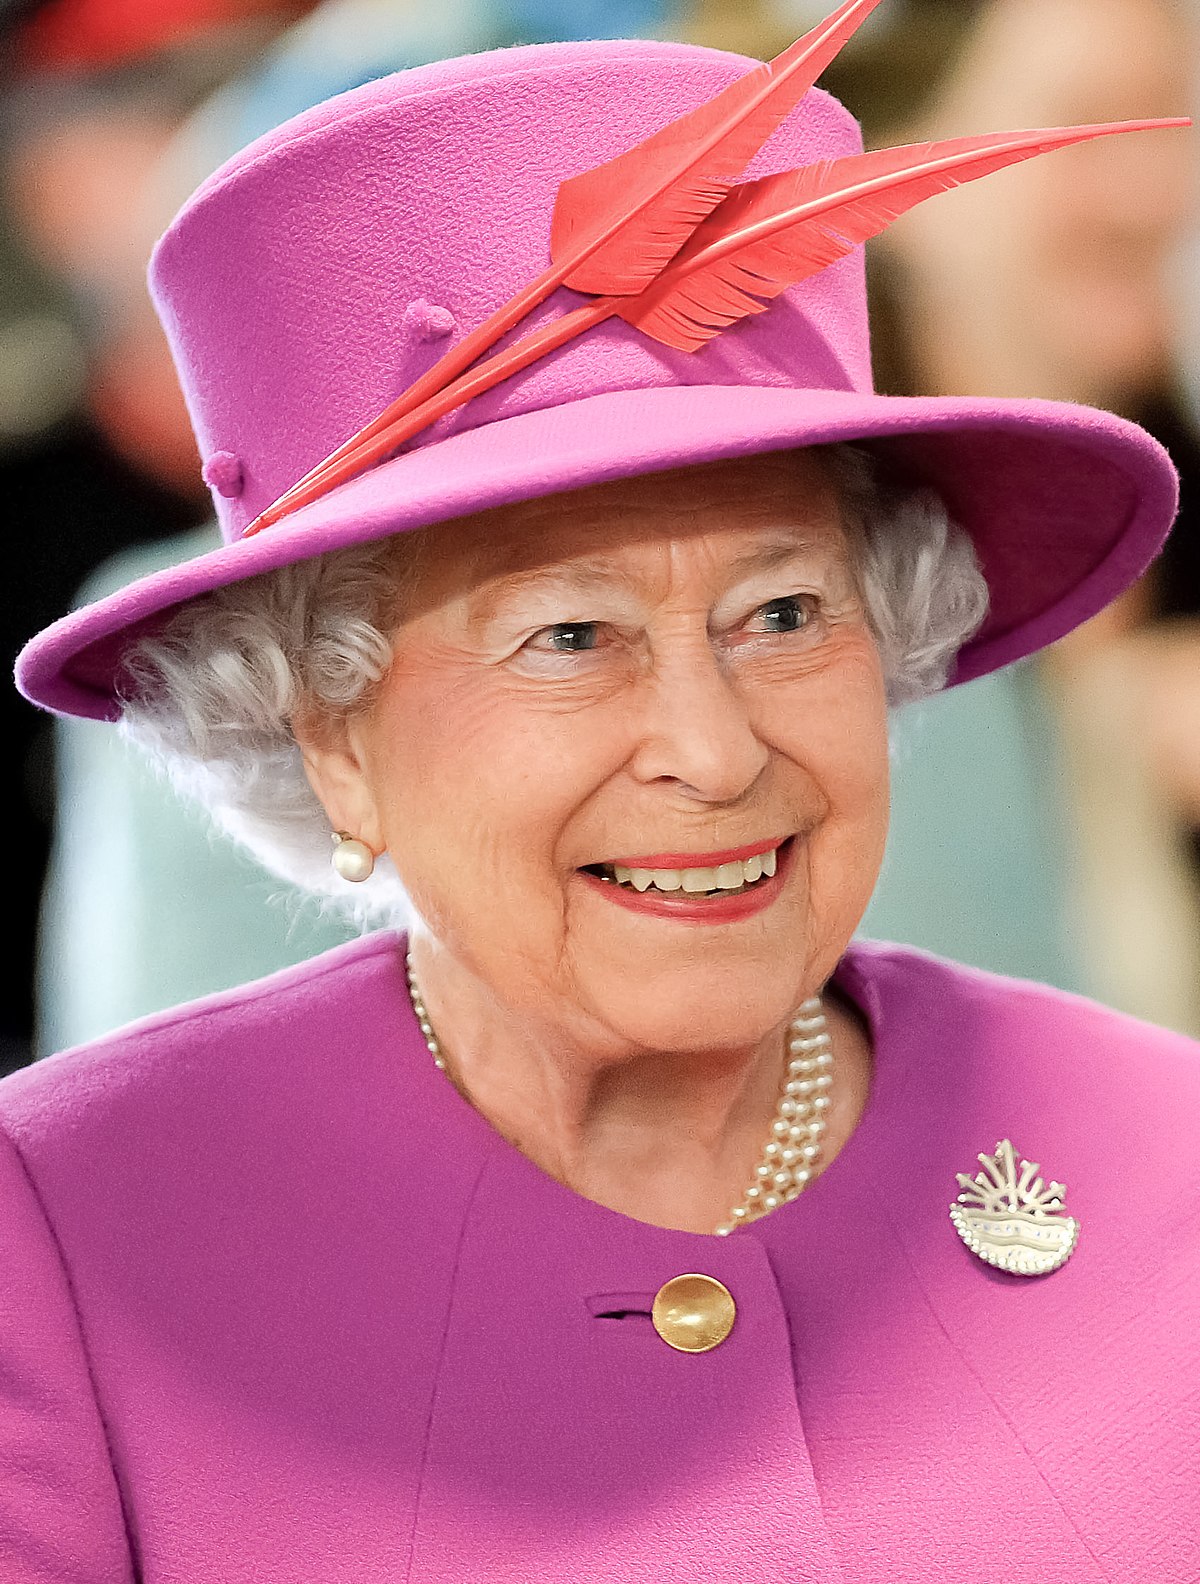 Royal Family News: Queen Elizabeth Says NO to Prince Charles Big Plans to Give Buckingham Palace a Makeover.